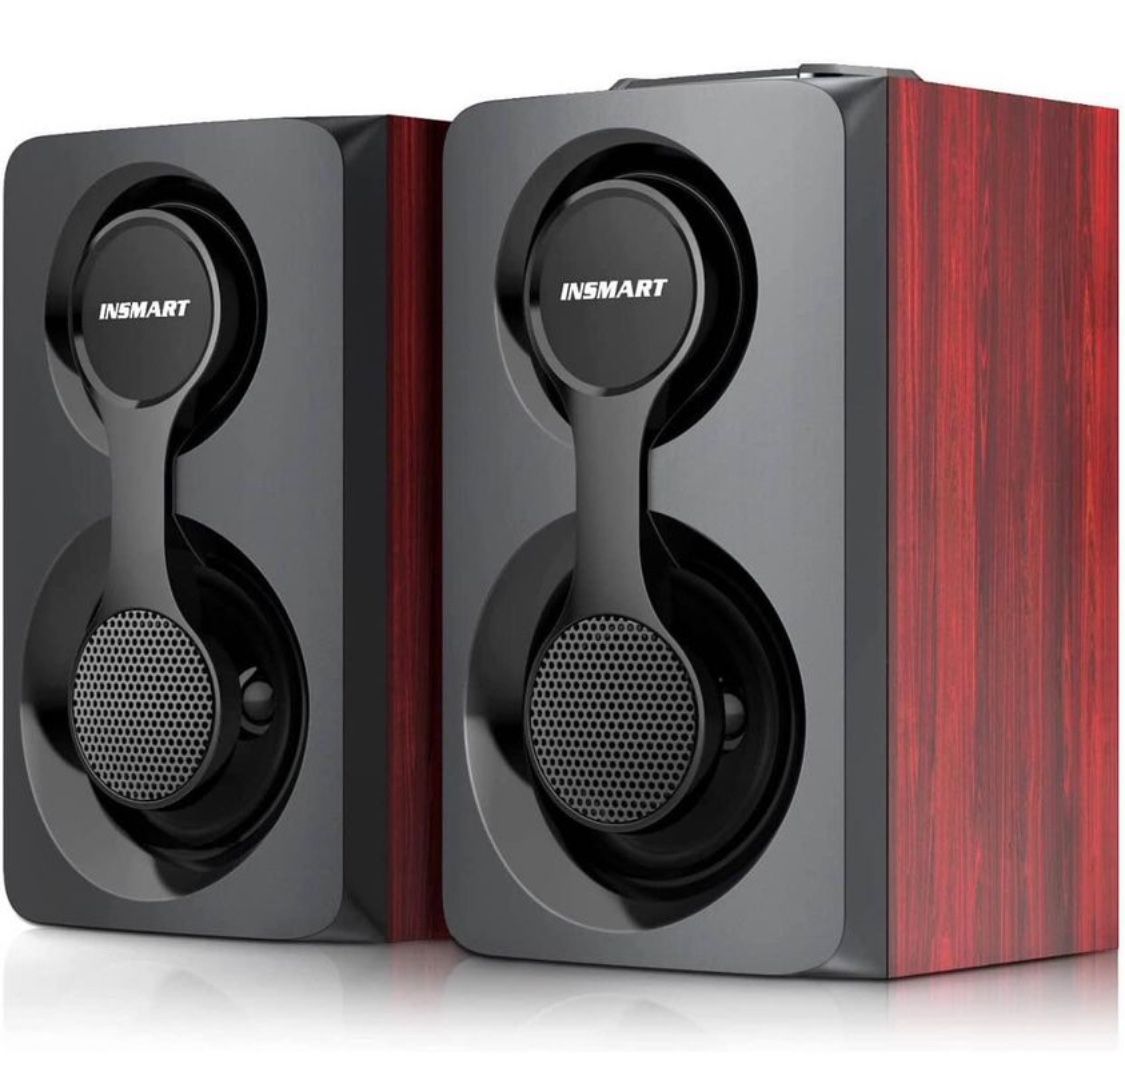 Computer Speakers, Support Wired and Bluetooth 5.0, Wooden Speakers with 2.0 Stereo Volume Control, Triple Channel Multimedia Speakers for PC/Laptops/